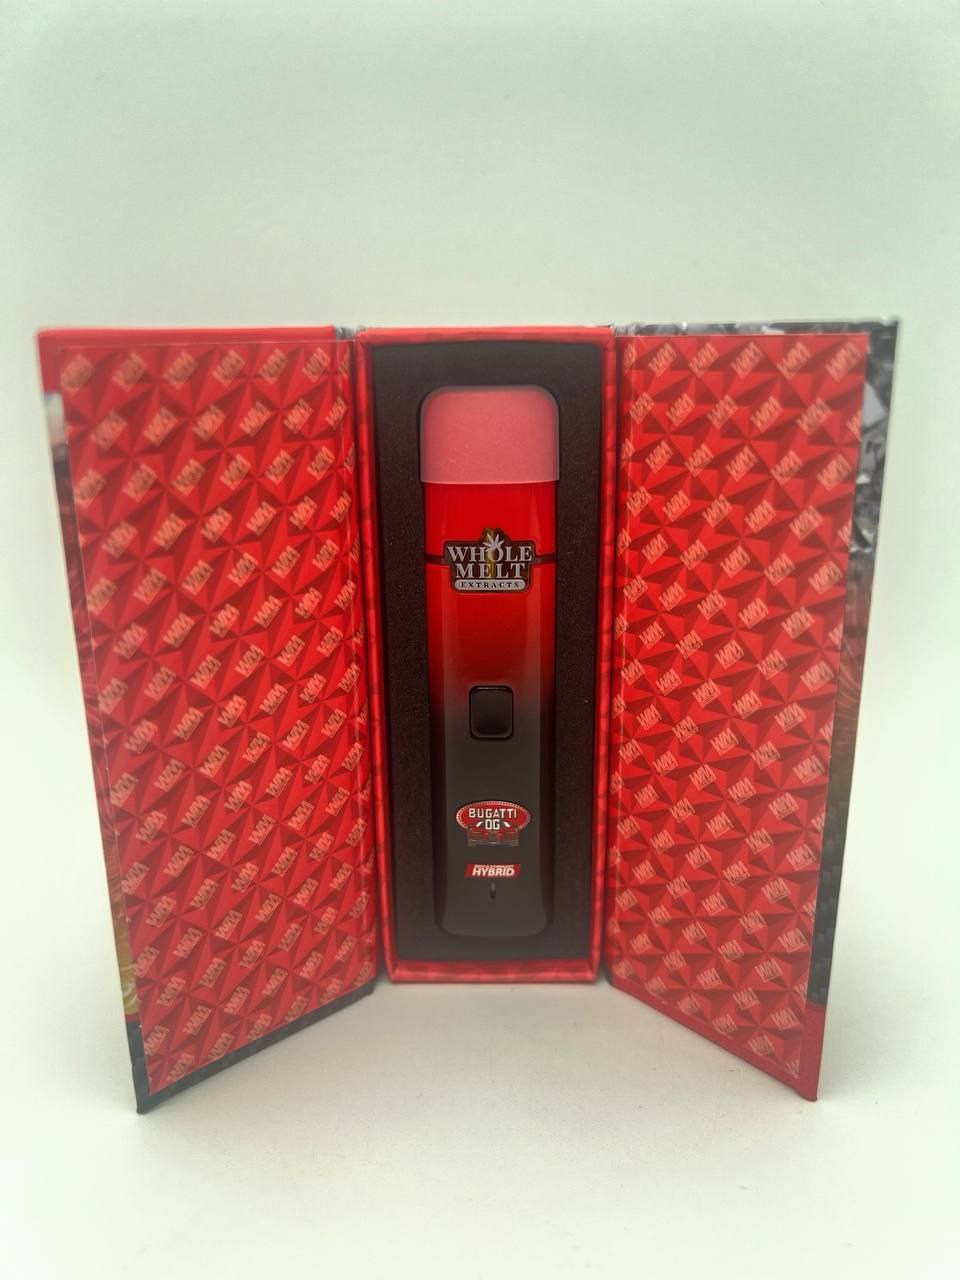 A red Import placeholder for 27 stands upright inside an open decorative red box with repetitive white logo pattern. The Import placeholder for 27 features the logo "WHOLE MELT EXTRACTS" and includes the text "HYBRID" and "0.8g." The interior of the box matches the exterior pattern.